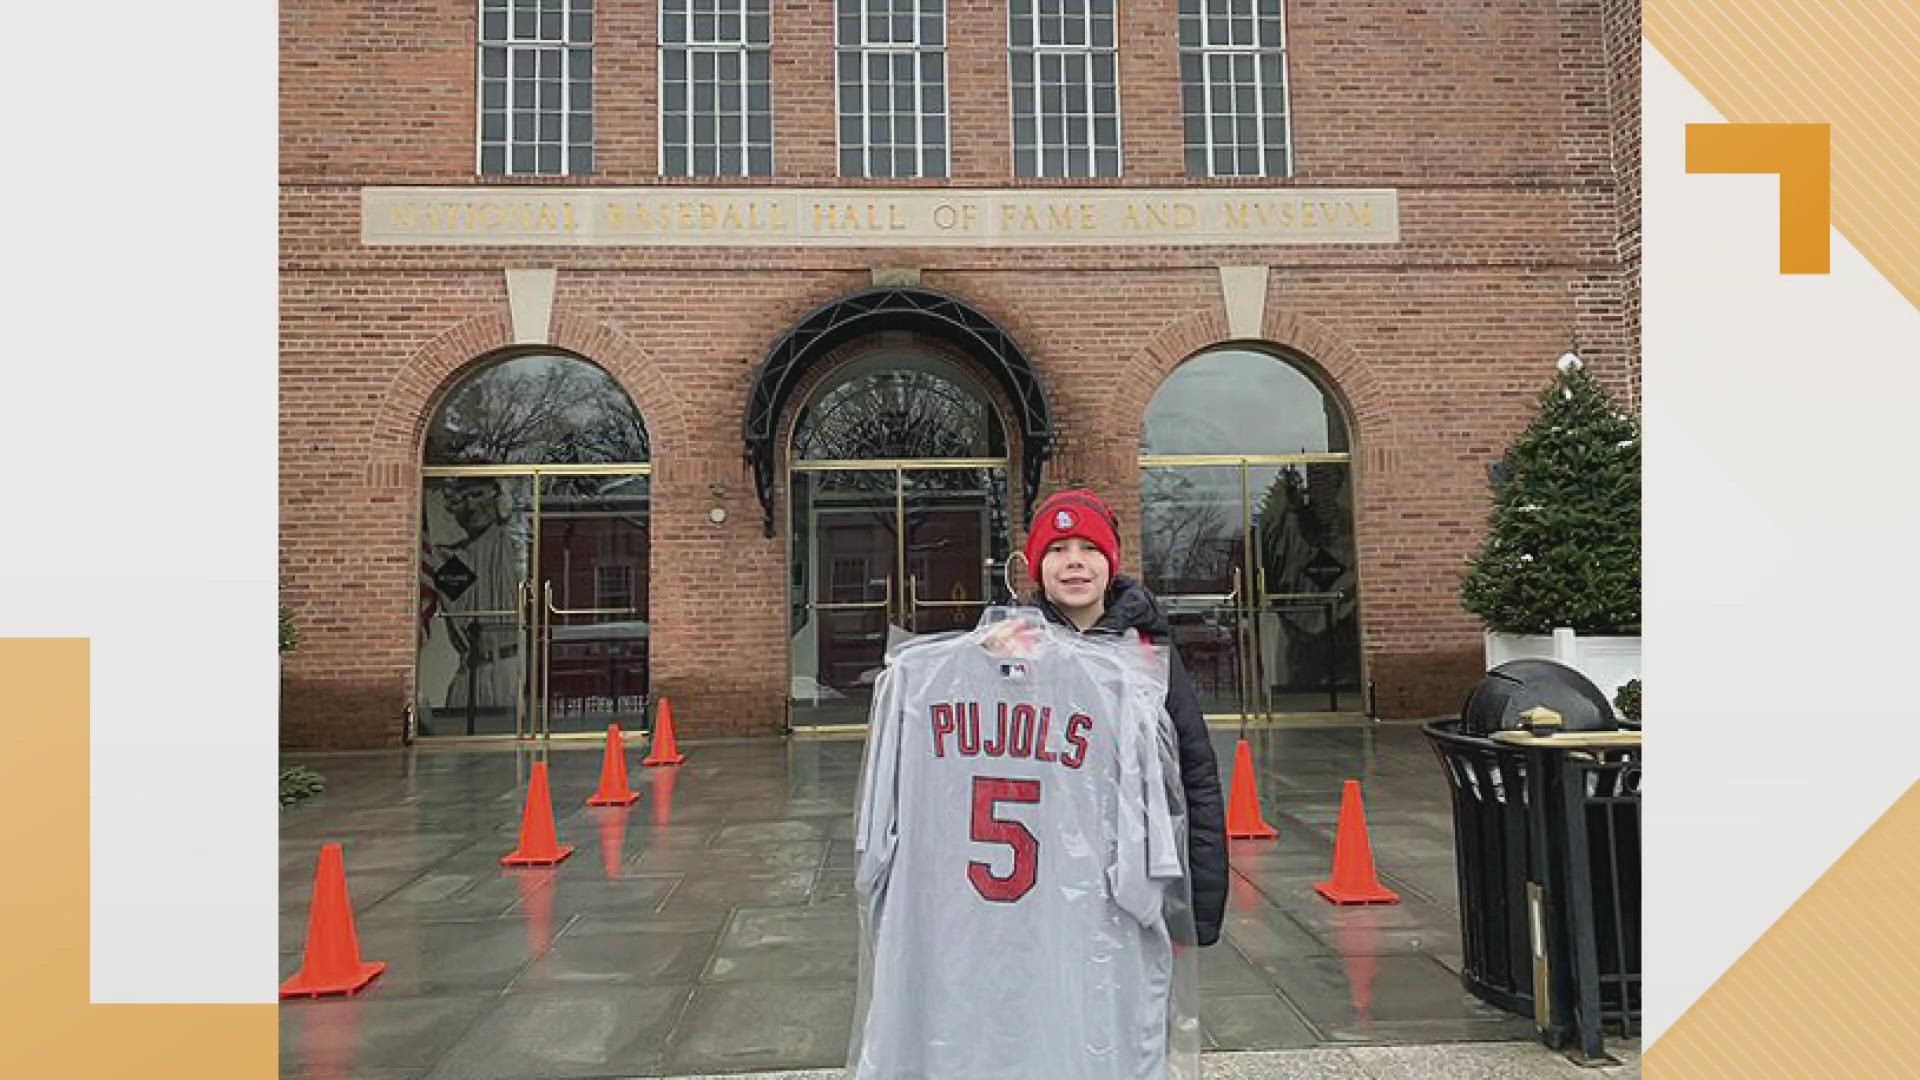 Young fan loans gifted Pujols jersey to Baseball Hall of Fame